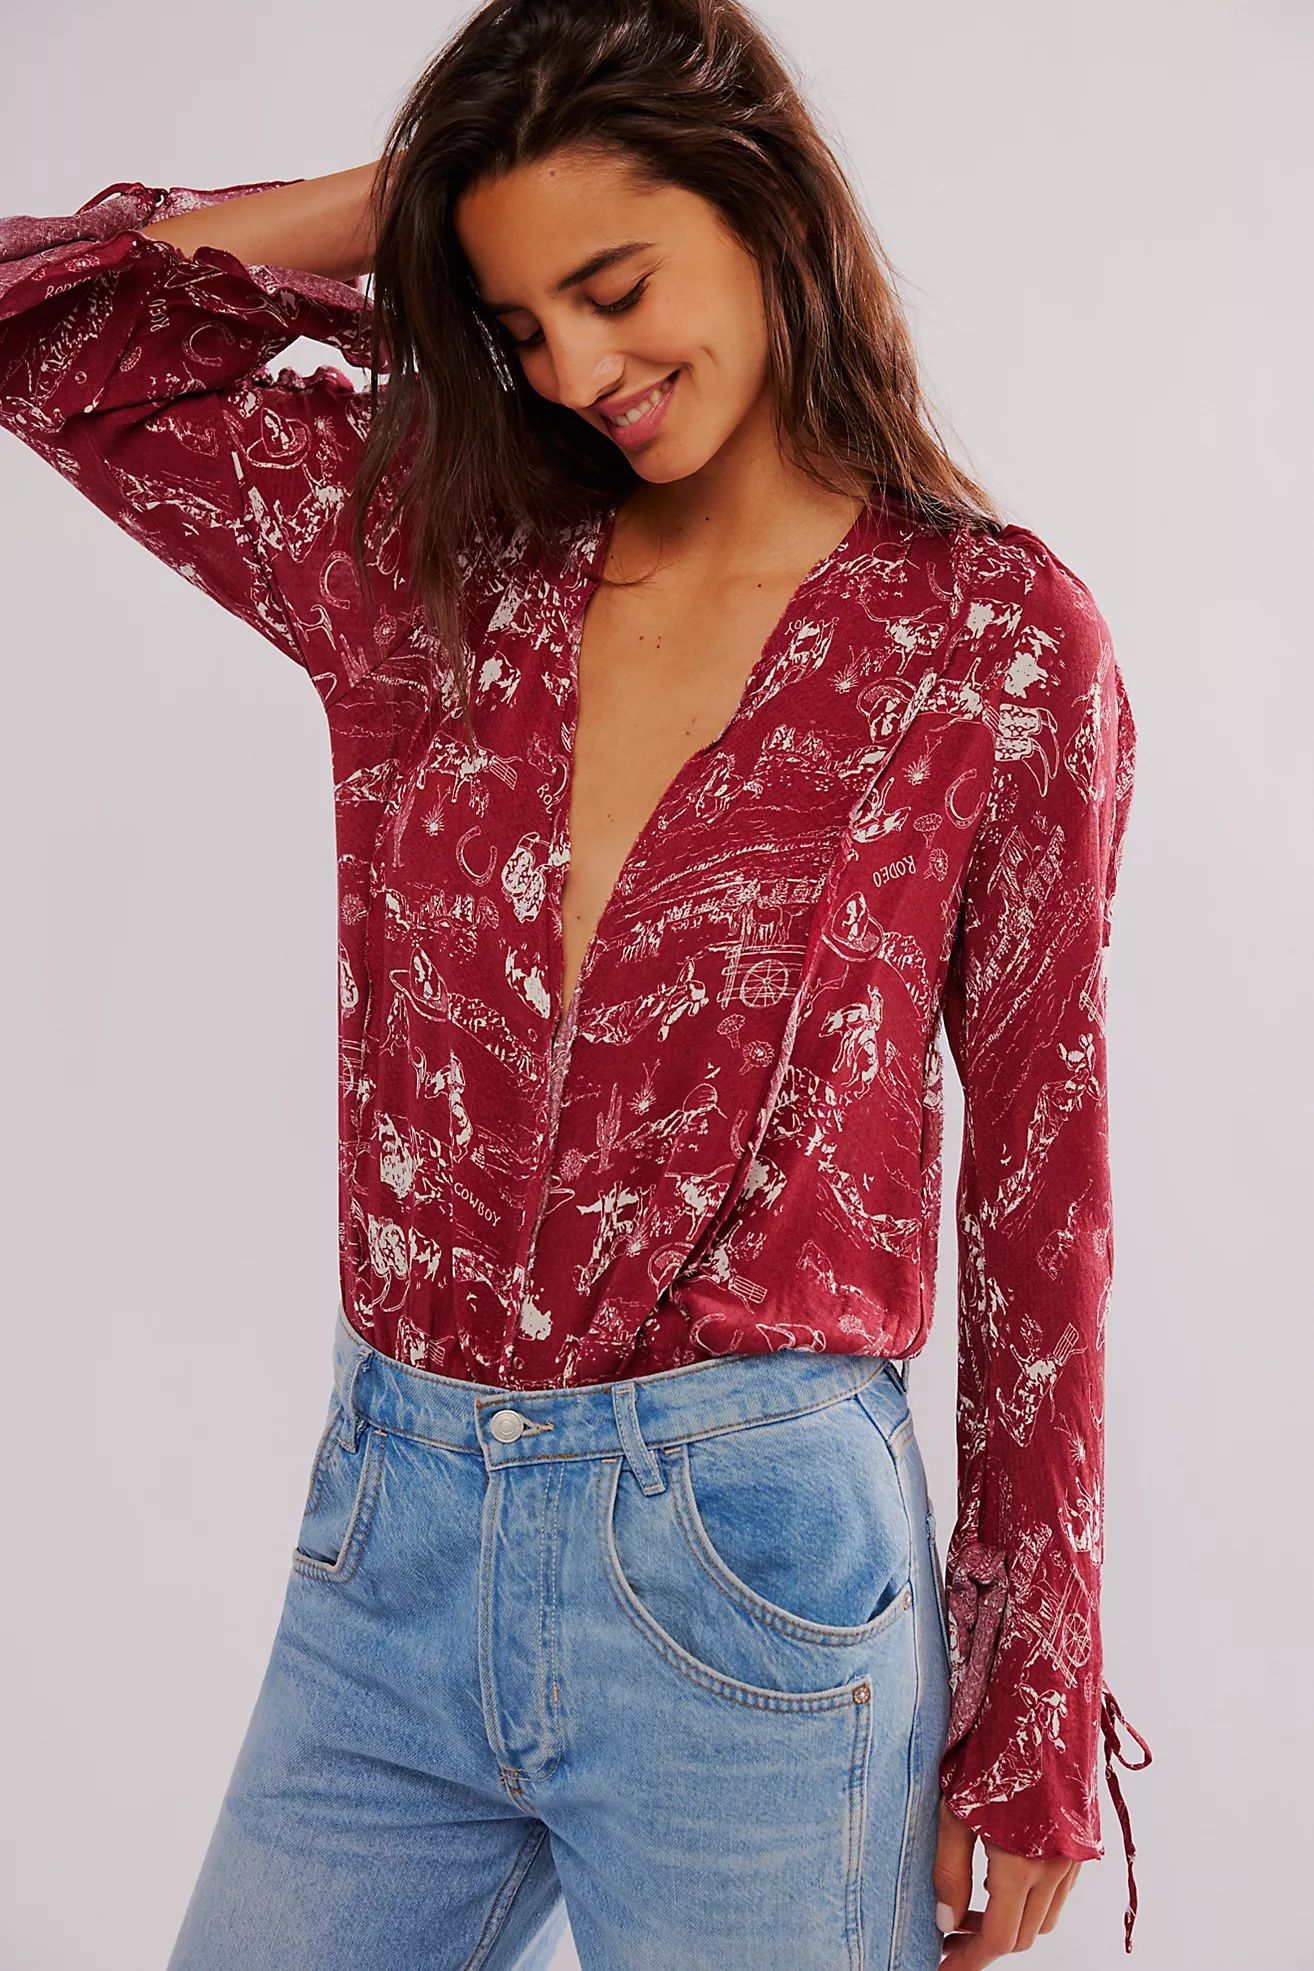 Shop All Intimately | Free People (Global - UK&FR Excluded)